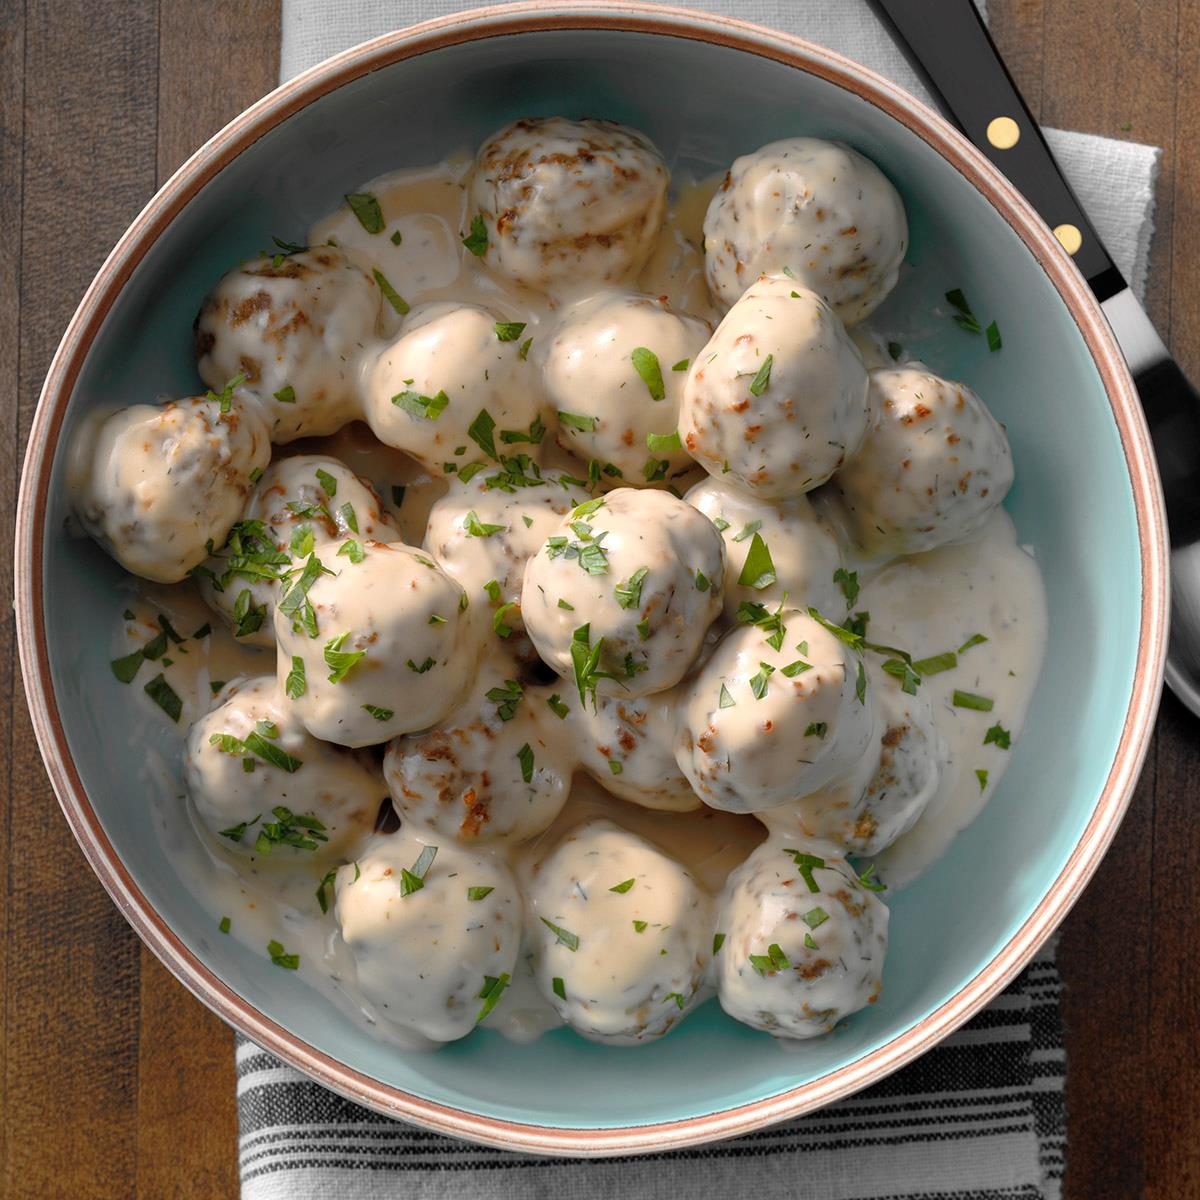 https://www.tasteofhome.com/wp-content/uploads/2018/07/Quick-and-Easy-Swedish-Meatballs_EXPS_THSO18_228834_D04_20_3b.jpg?fit=700%2C1024